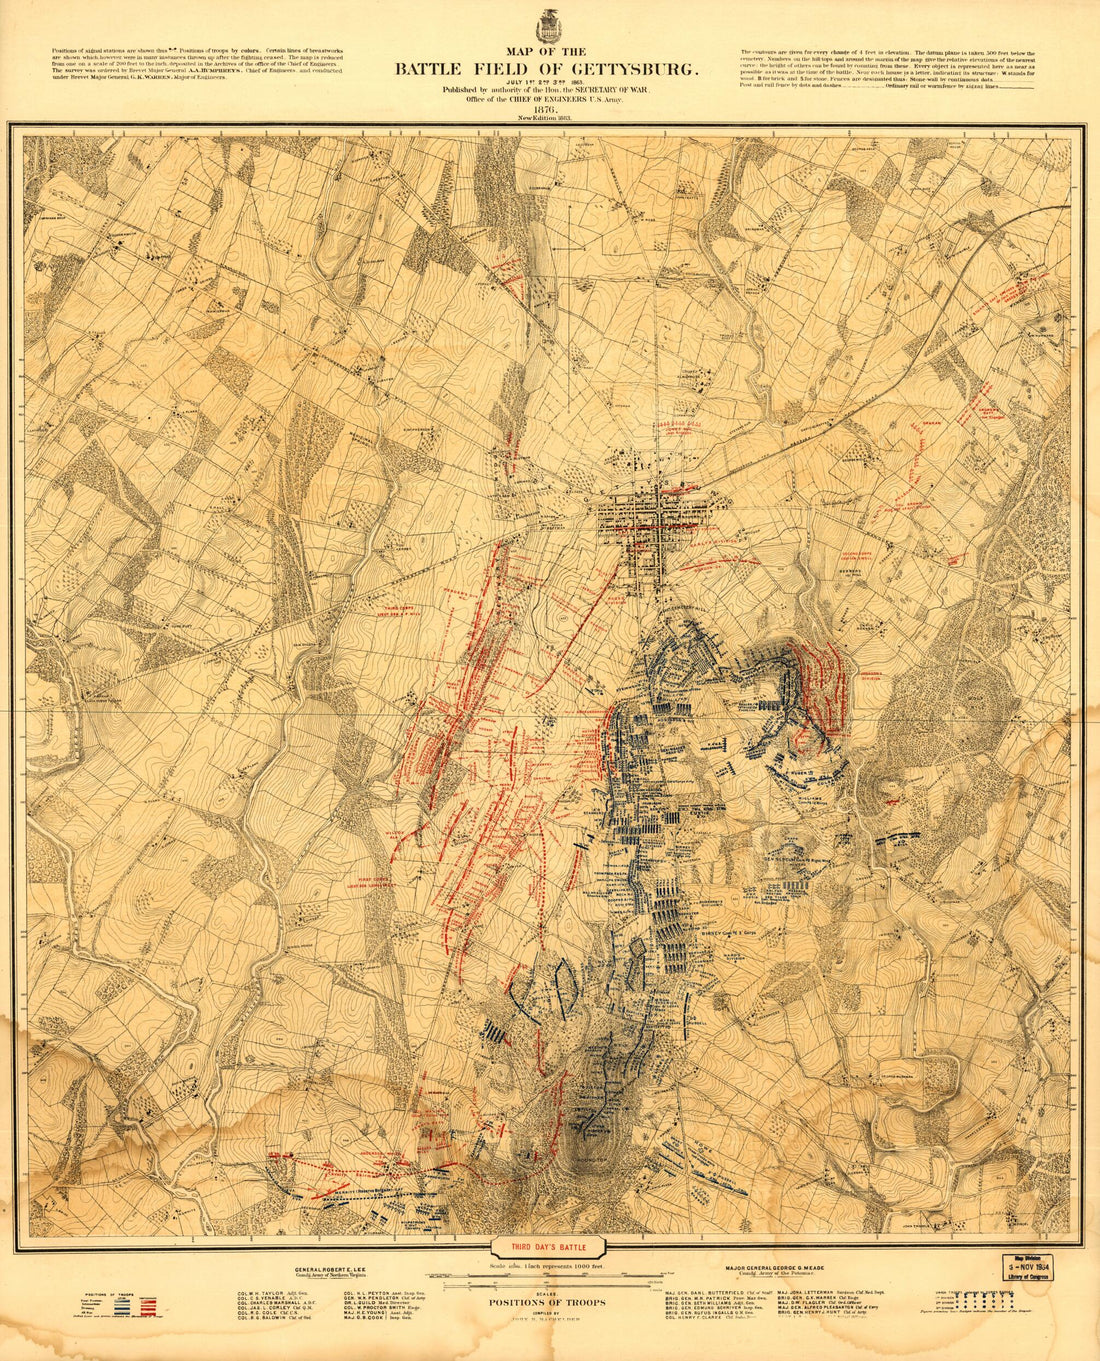 This old map of Map of the Battlefield of Gettysburg. July 1st, 2nd, 3rd, from 1863 was created by John B. (John Badger) Bachelder in 1863